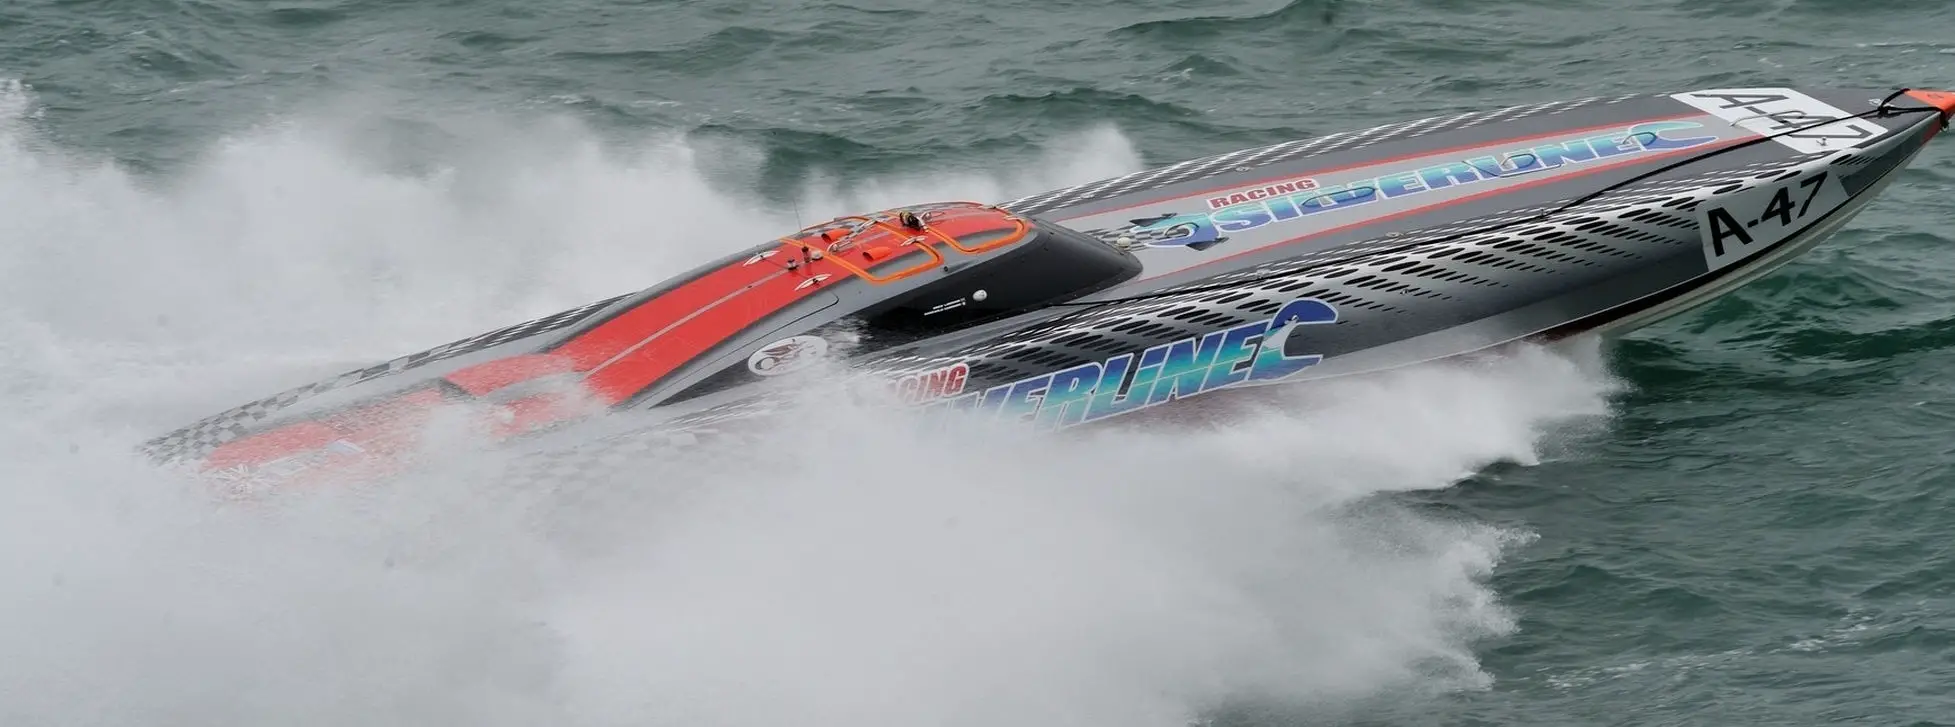 exmouth powerboat race new year's day